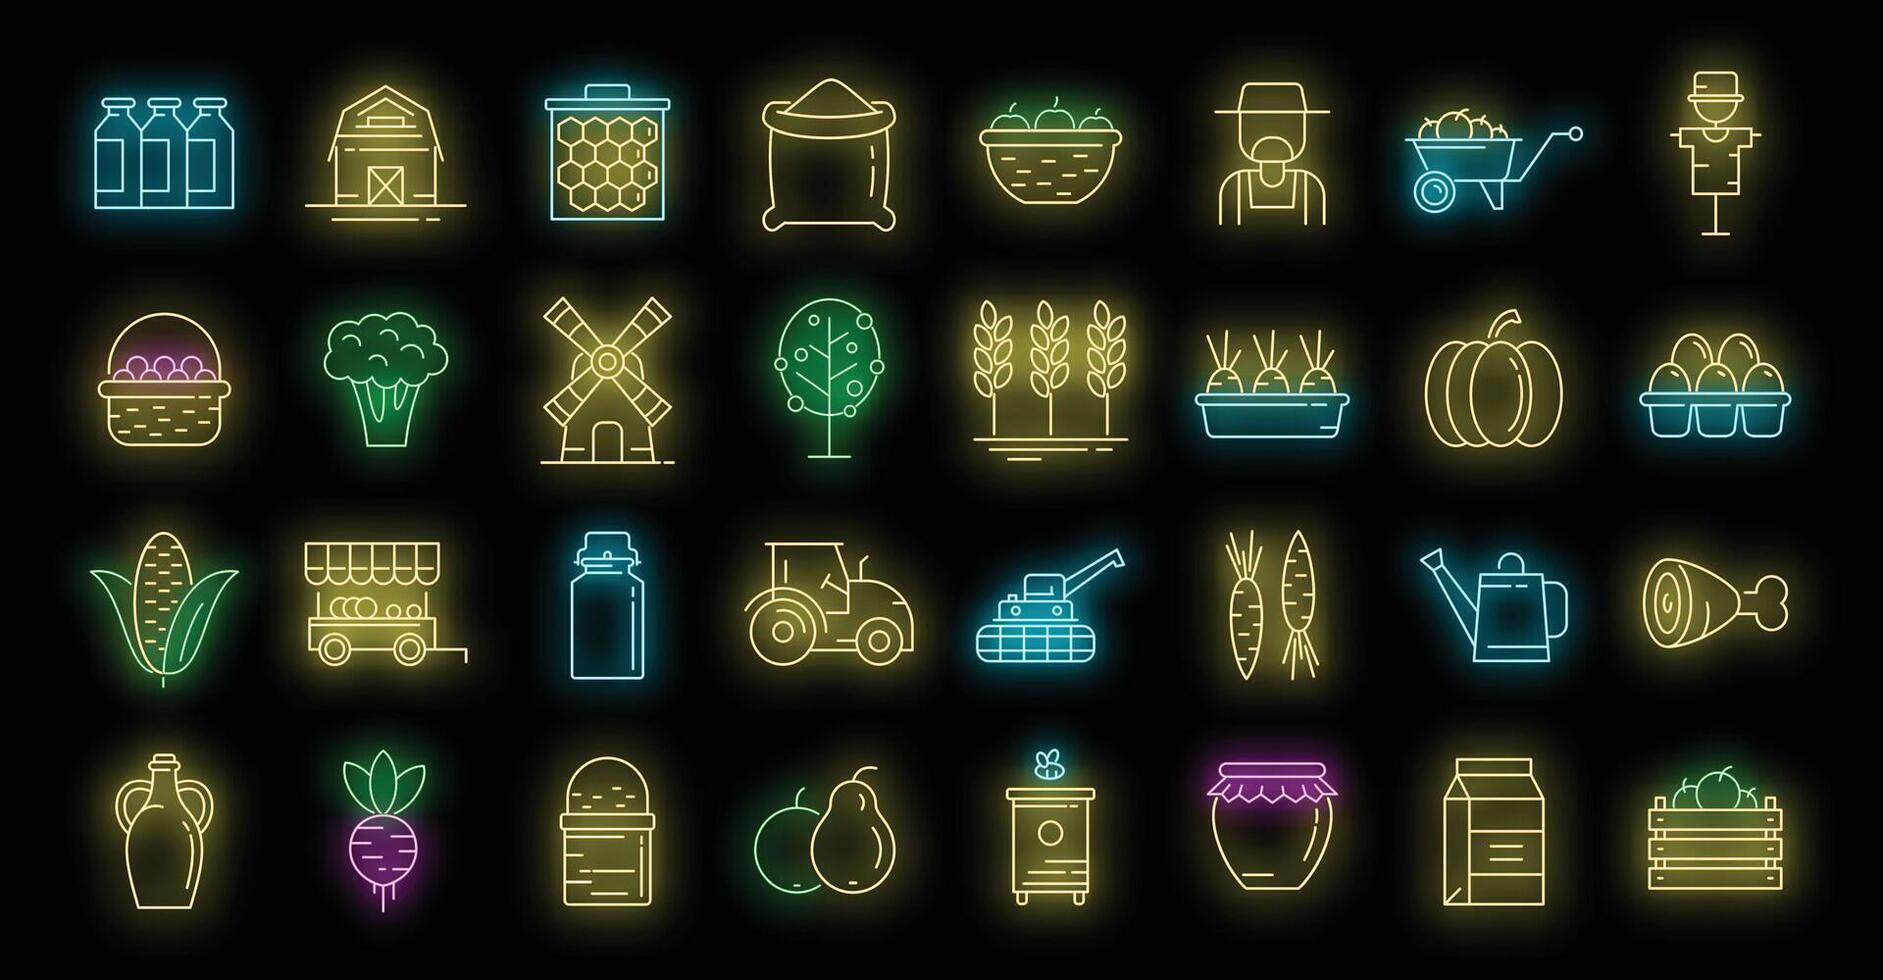 Producer icons set vector neon